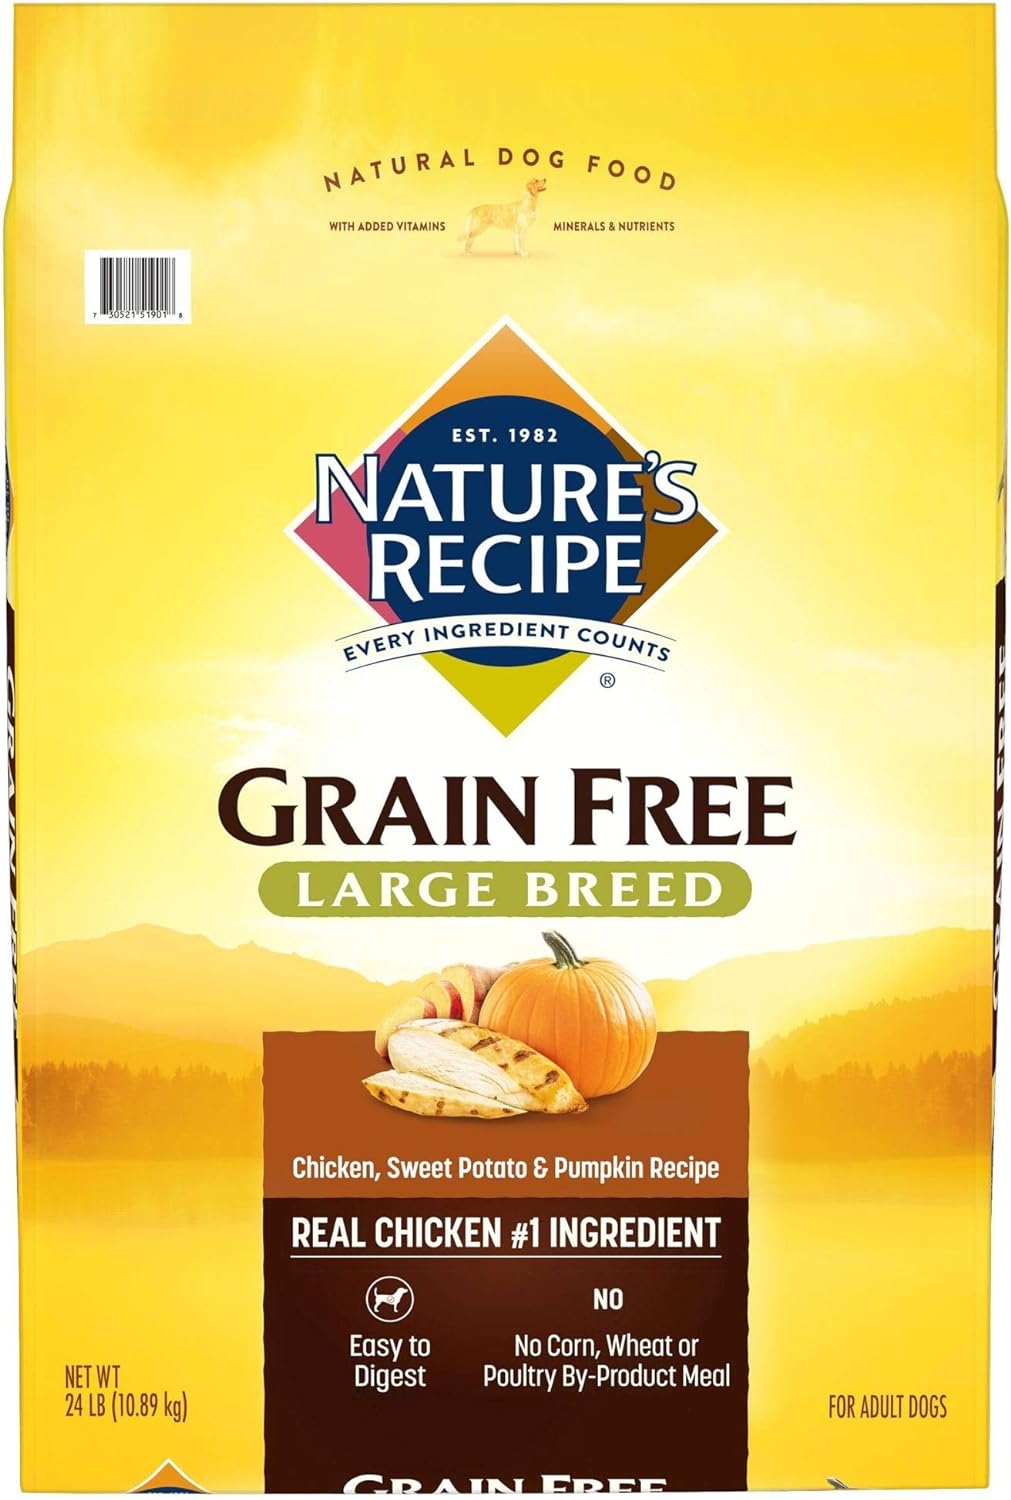 Nature’s Recipe Large Breed Grain-Free Easy to Digest Chicken, Sweet Potato, & Pumpkin Recipe Dry Dog Food – Gallery Image 1